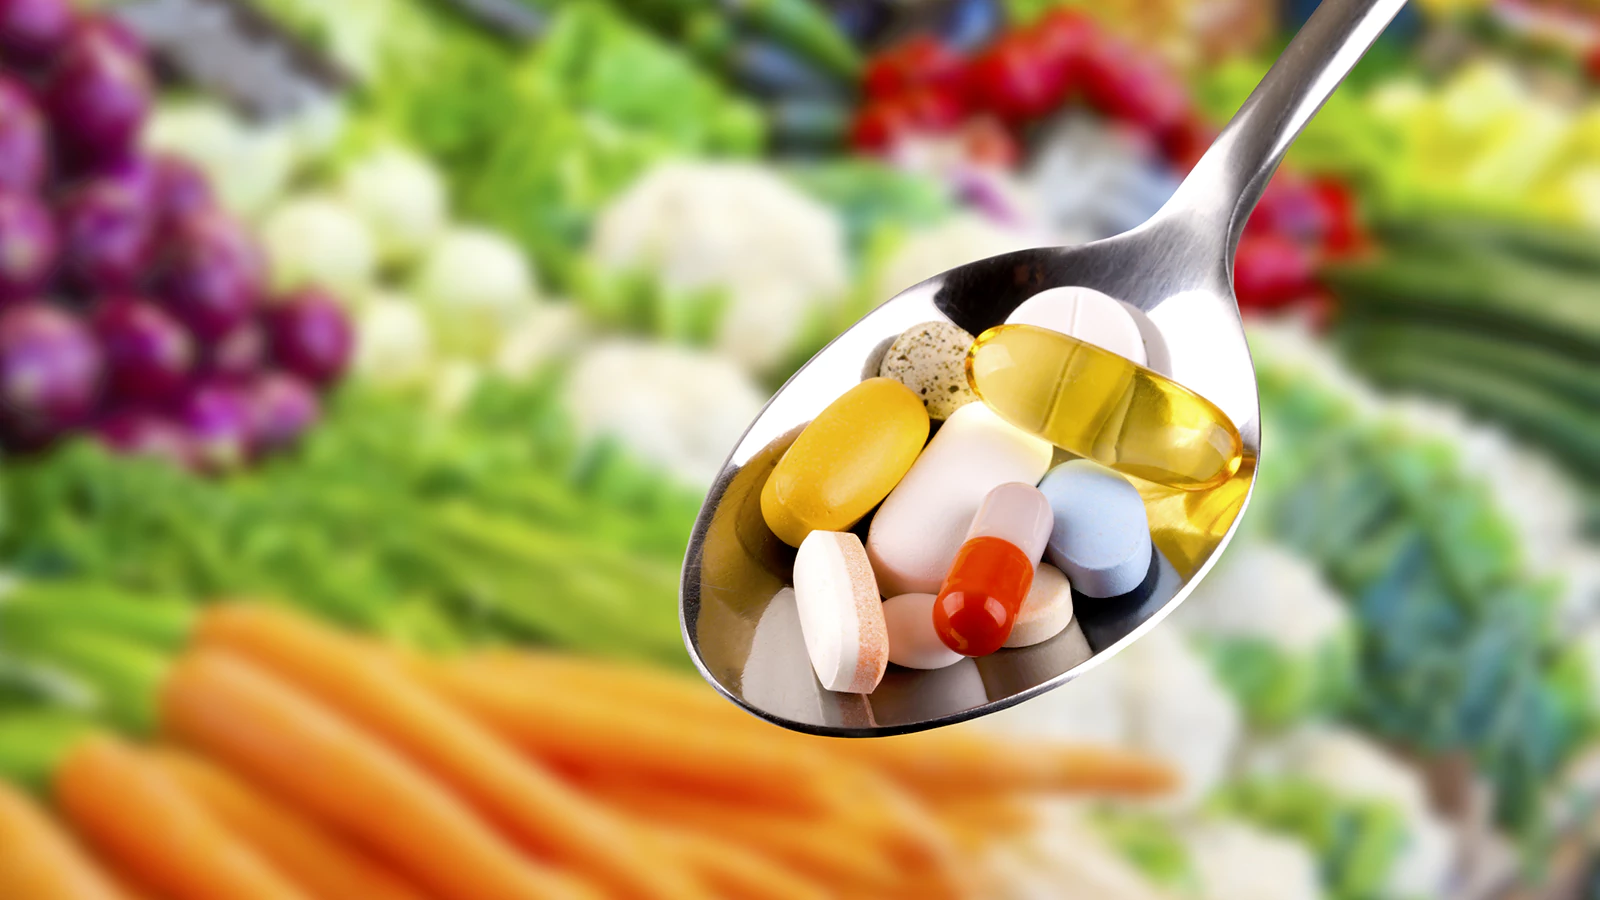 Antioxidant supplements vs whole foods- Paying to live a shorter life